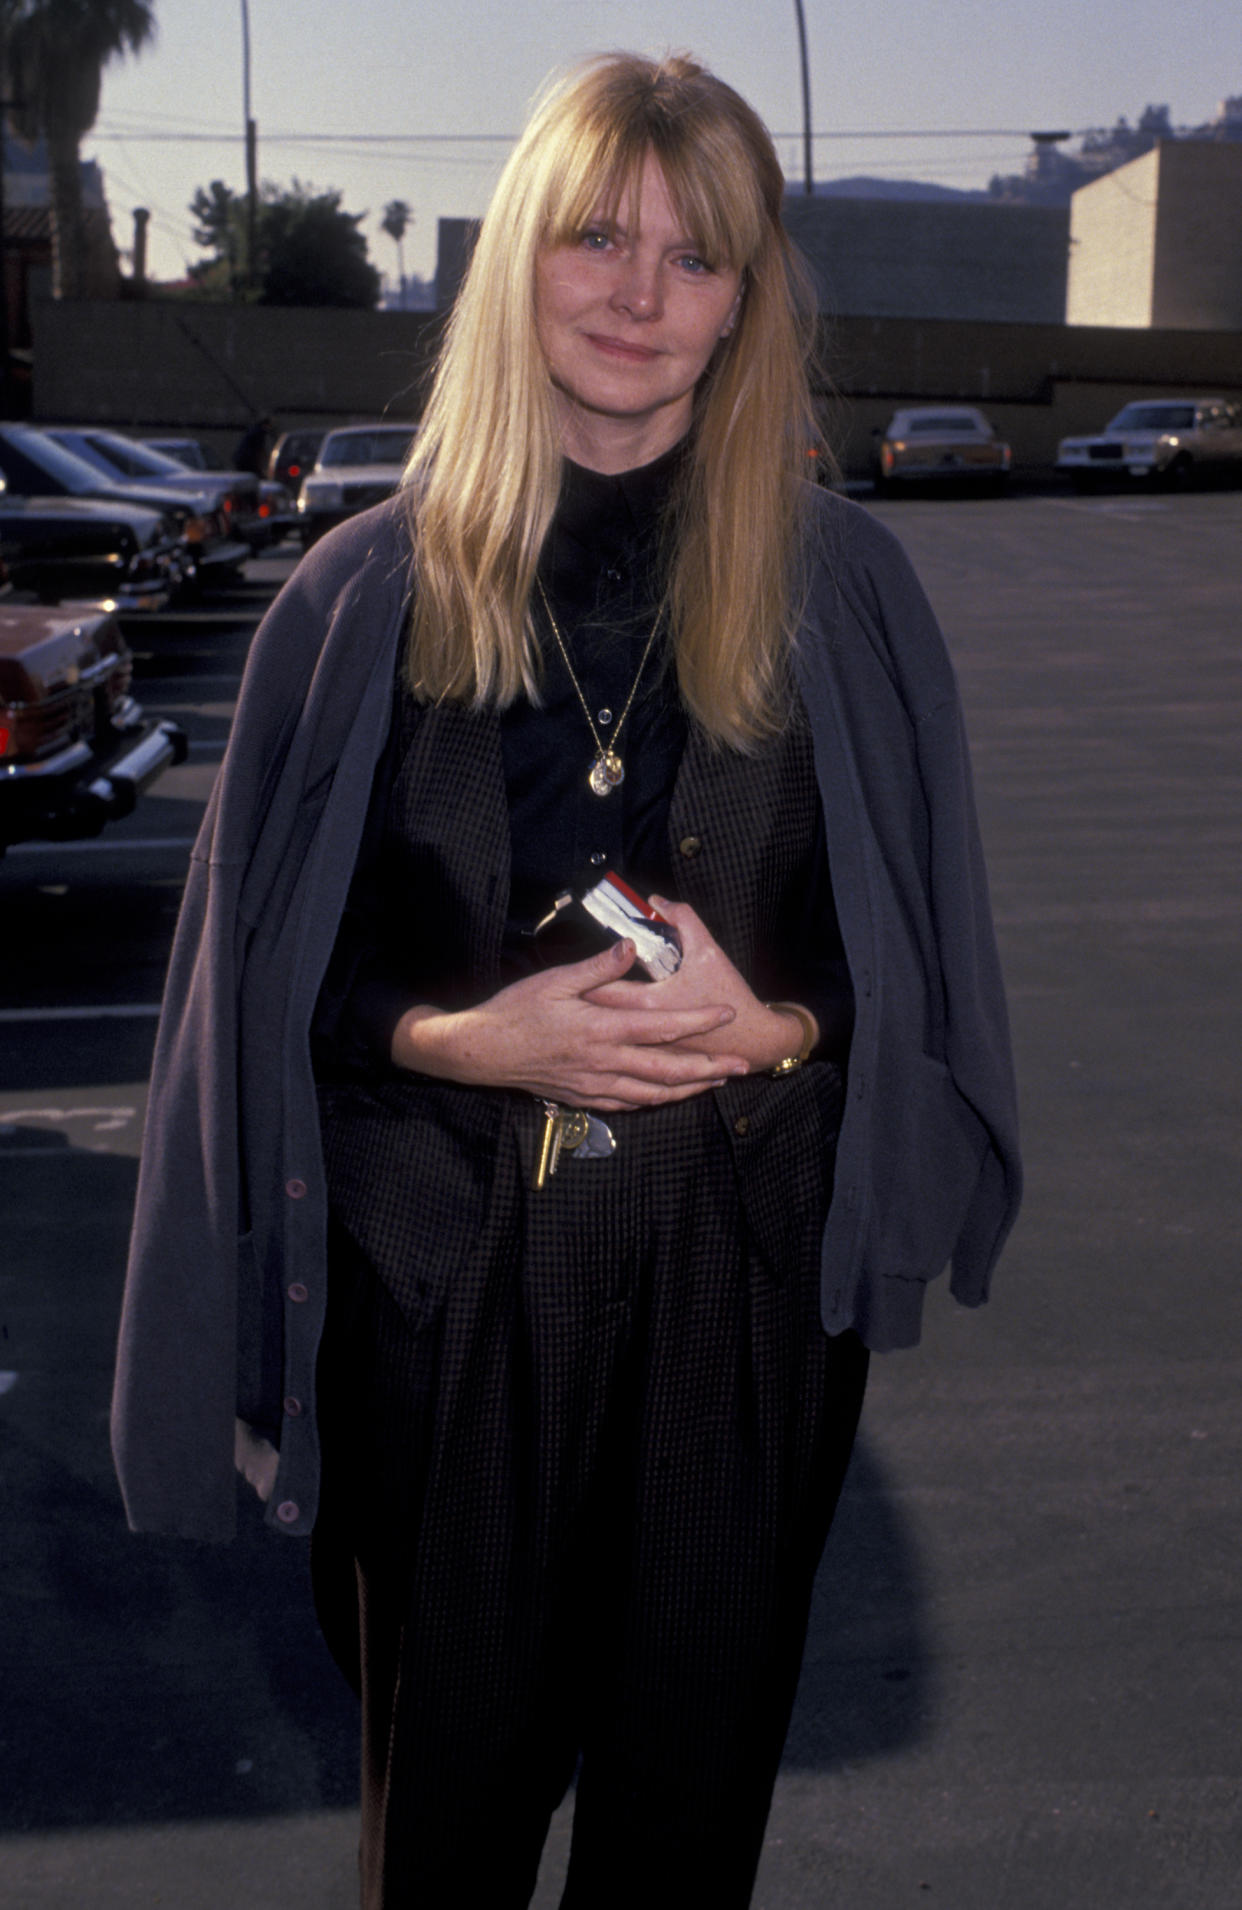 Melinda Dillon is snapped by the paparazzi in December 1988 in Hollywood, Calif. (Photo: Ron Galella, Ltd./Ron Galella Collection via Getty Images)